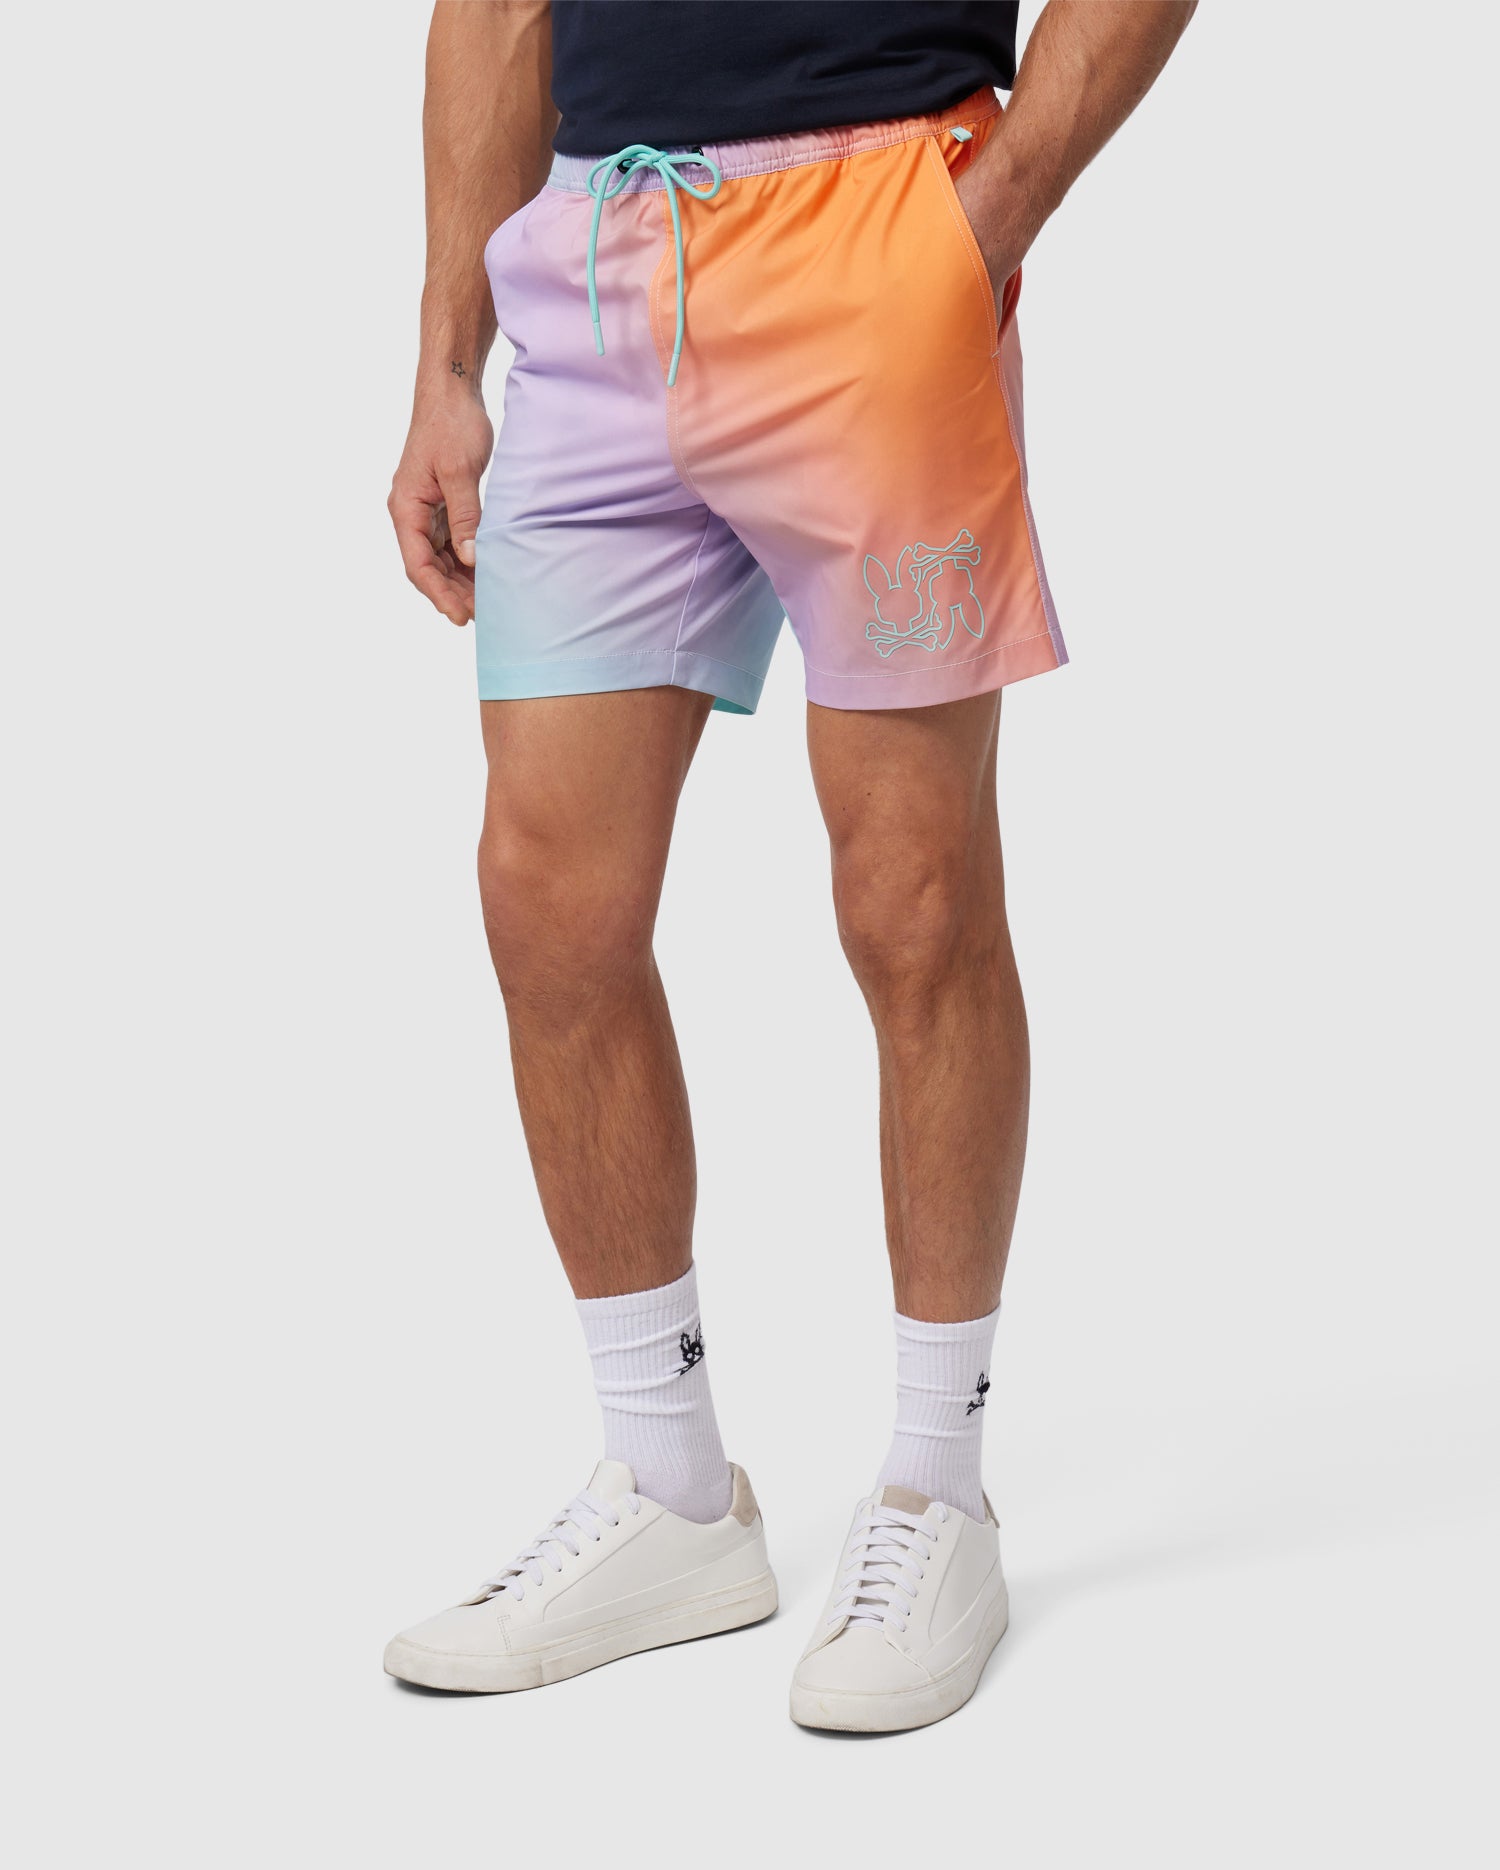 A person wearing a pair of Psycho Bunny MENS WINTON PRINTED SWIM TRUNK - B6W915A2PO with pastel colors of purple, orange, and blue. The trunks feature a small embroidered design on the left leg. They are also wearing white sneakers, white crew socks, and a dark blue t-shirt.